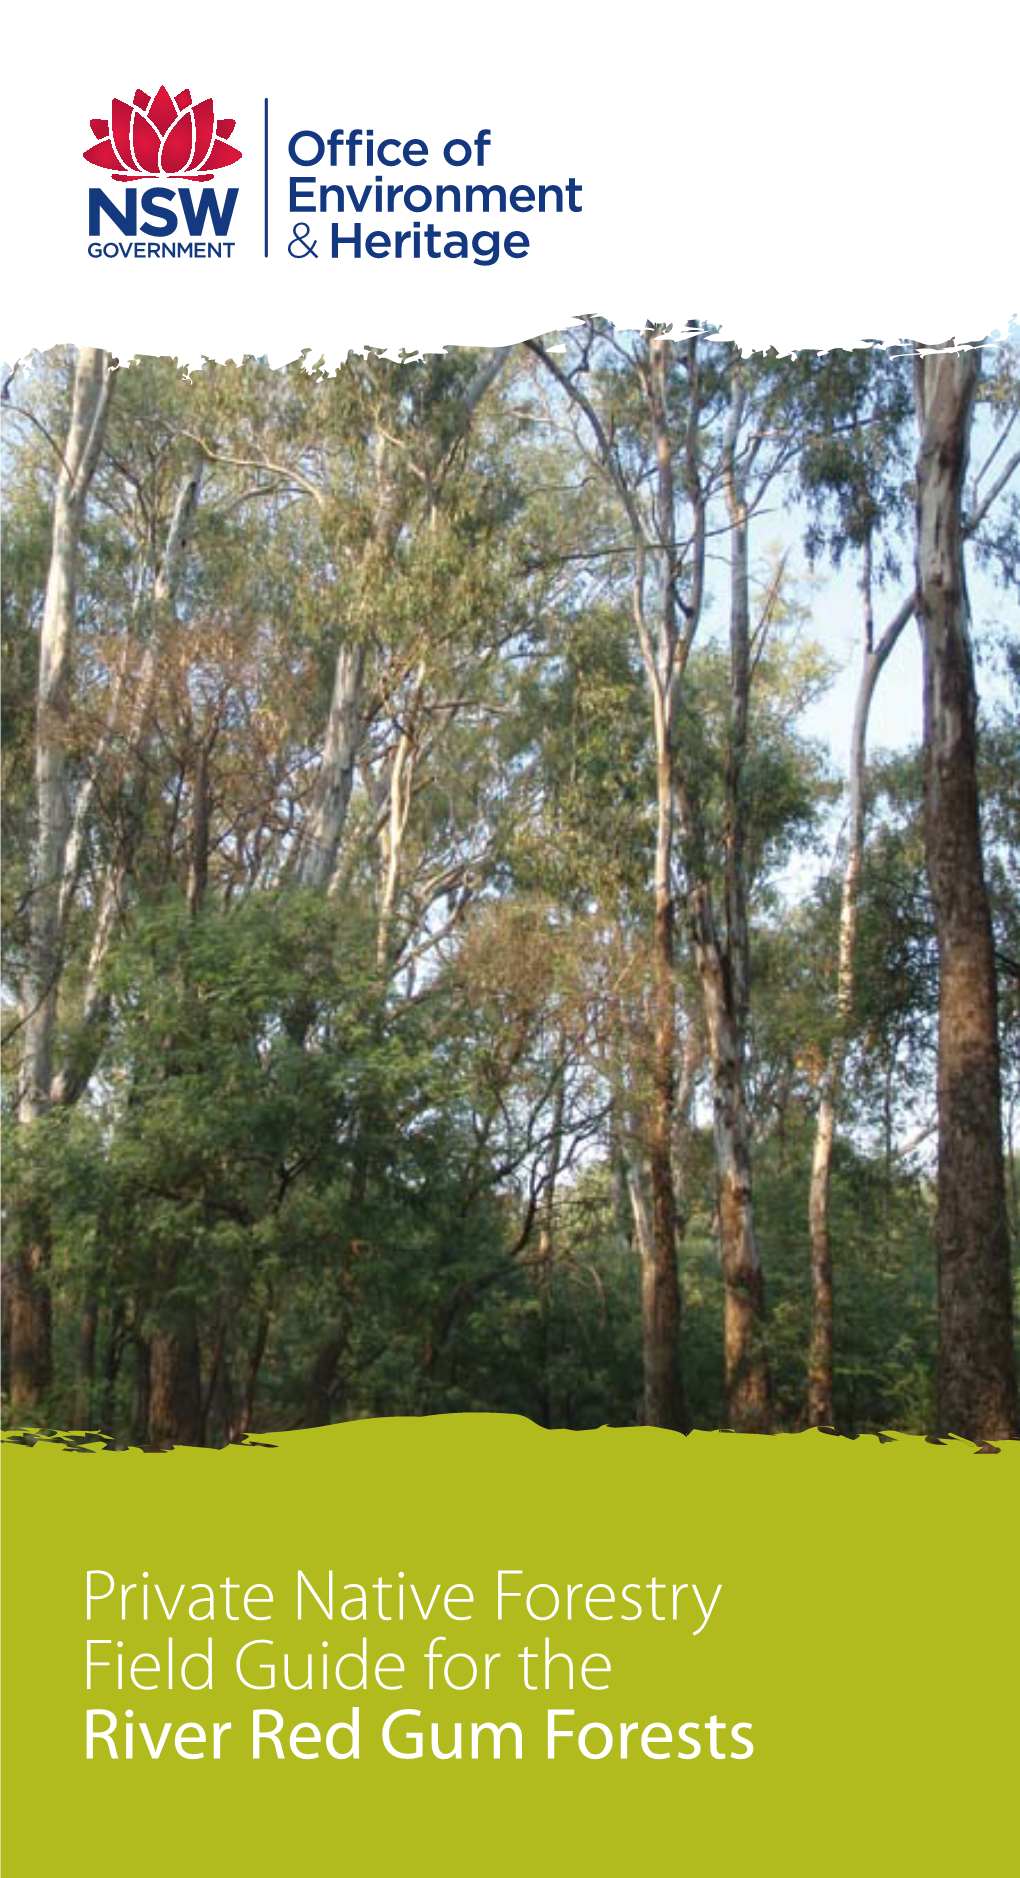 Private Native Forestry Field Guide for the River Red Gum Forests